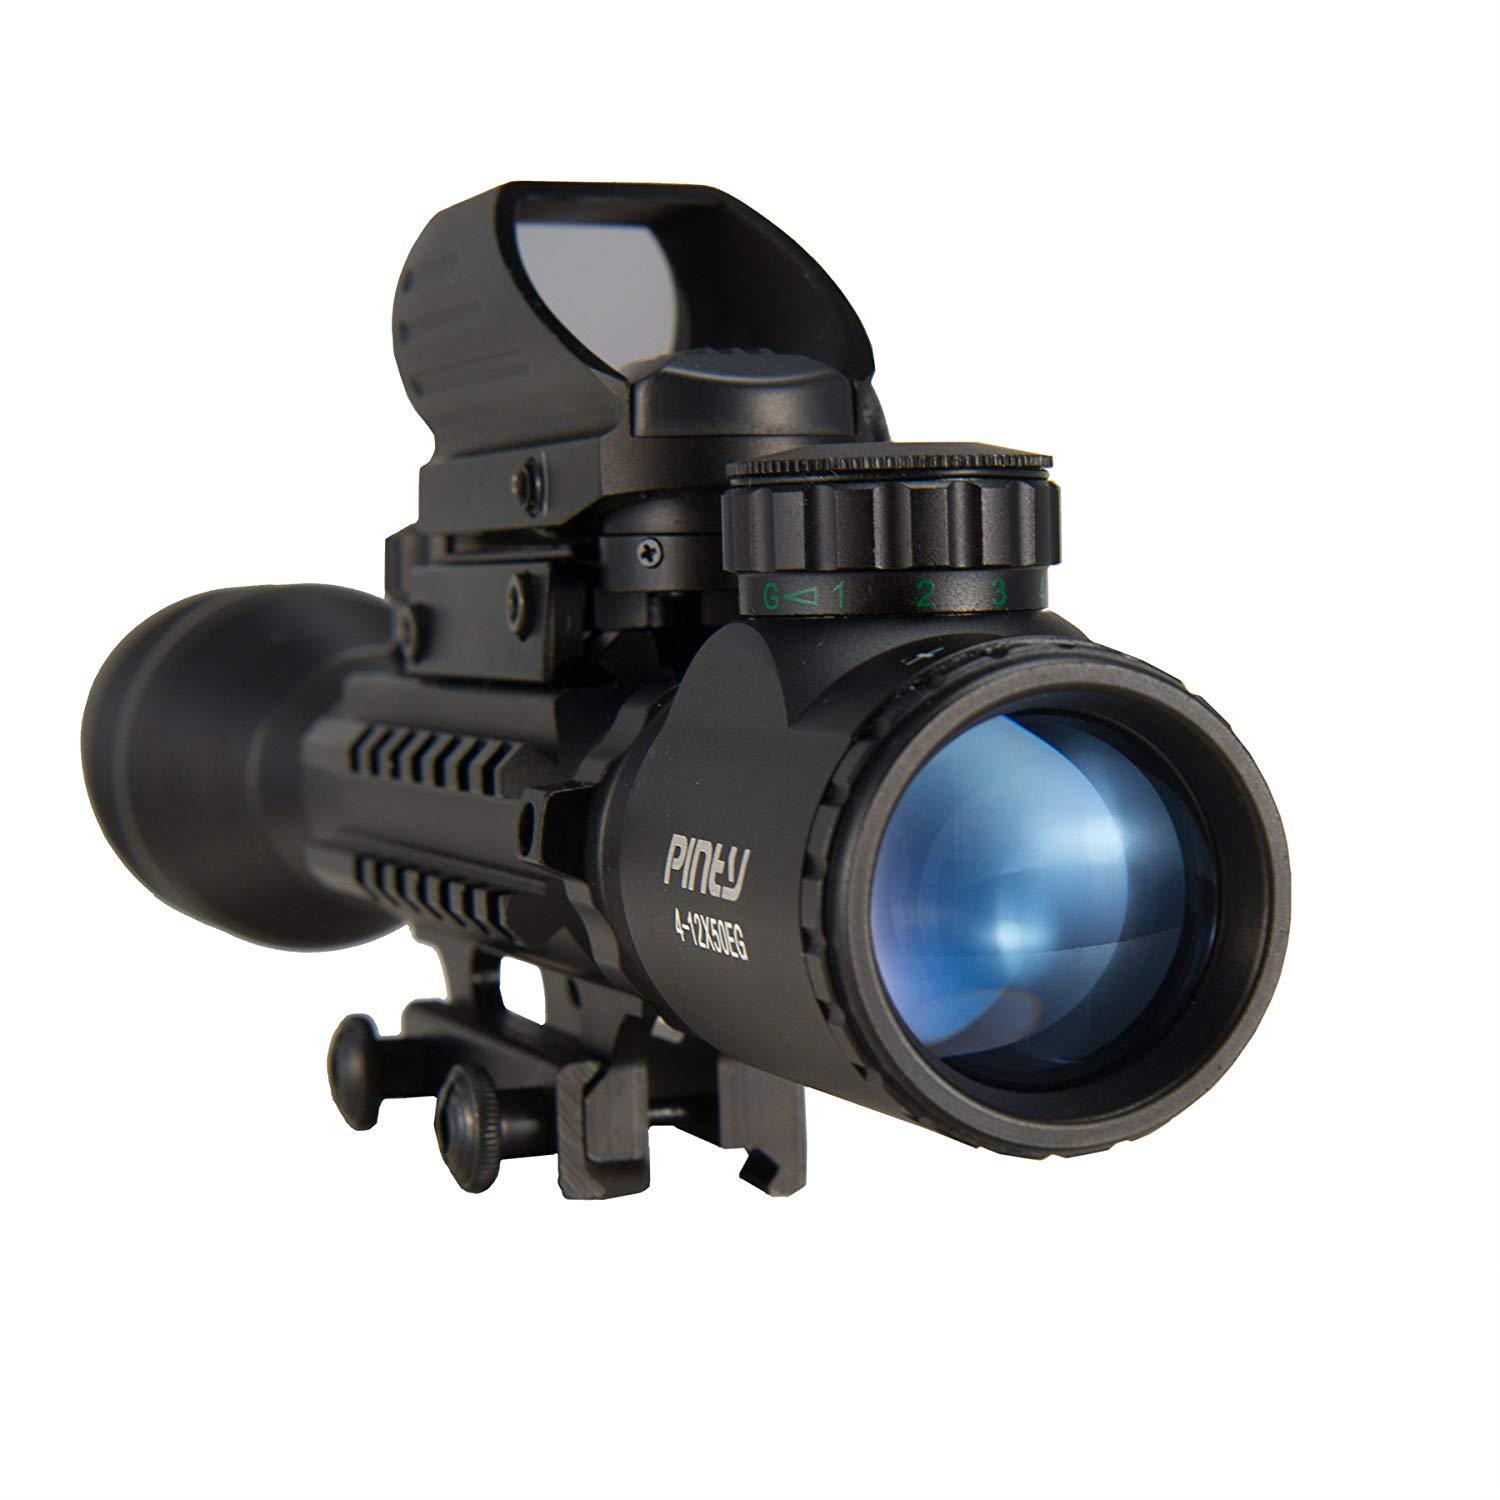 Pinty 3-in-1 Rifle Scope 4-12x50mmEG Rangefinder/Tactical Reticle Scope/Laser Sight & Red Dot Sight rifle scopes made in usa-bushnell scopes 